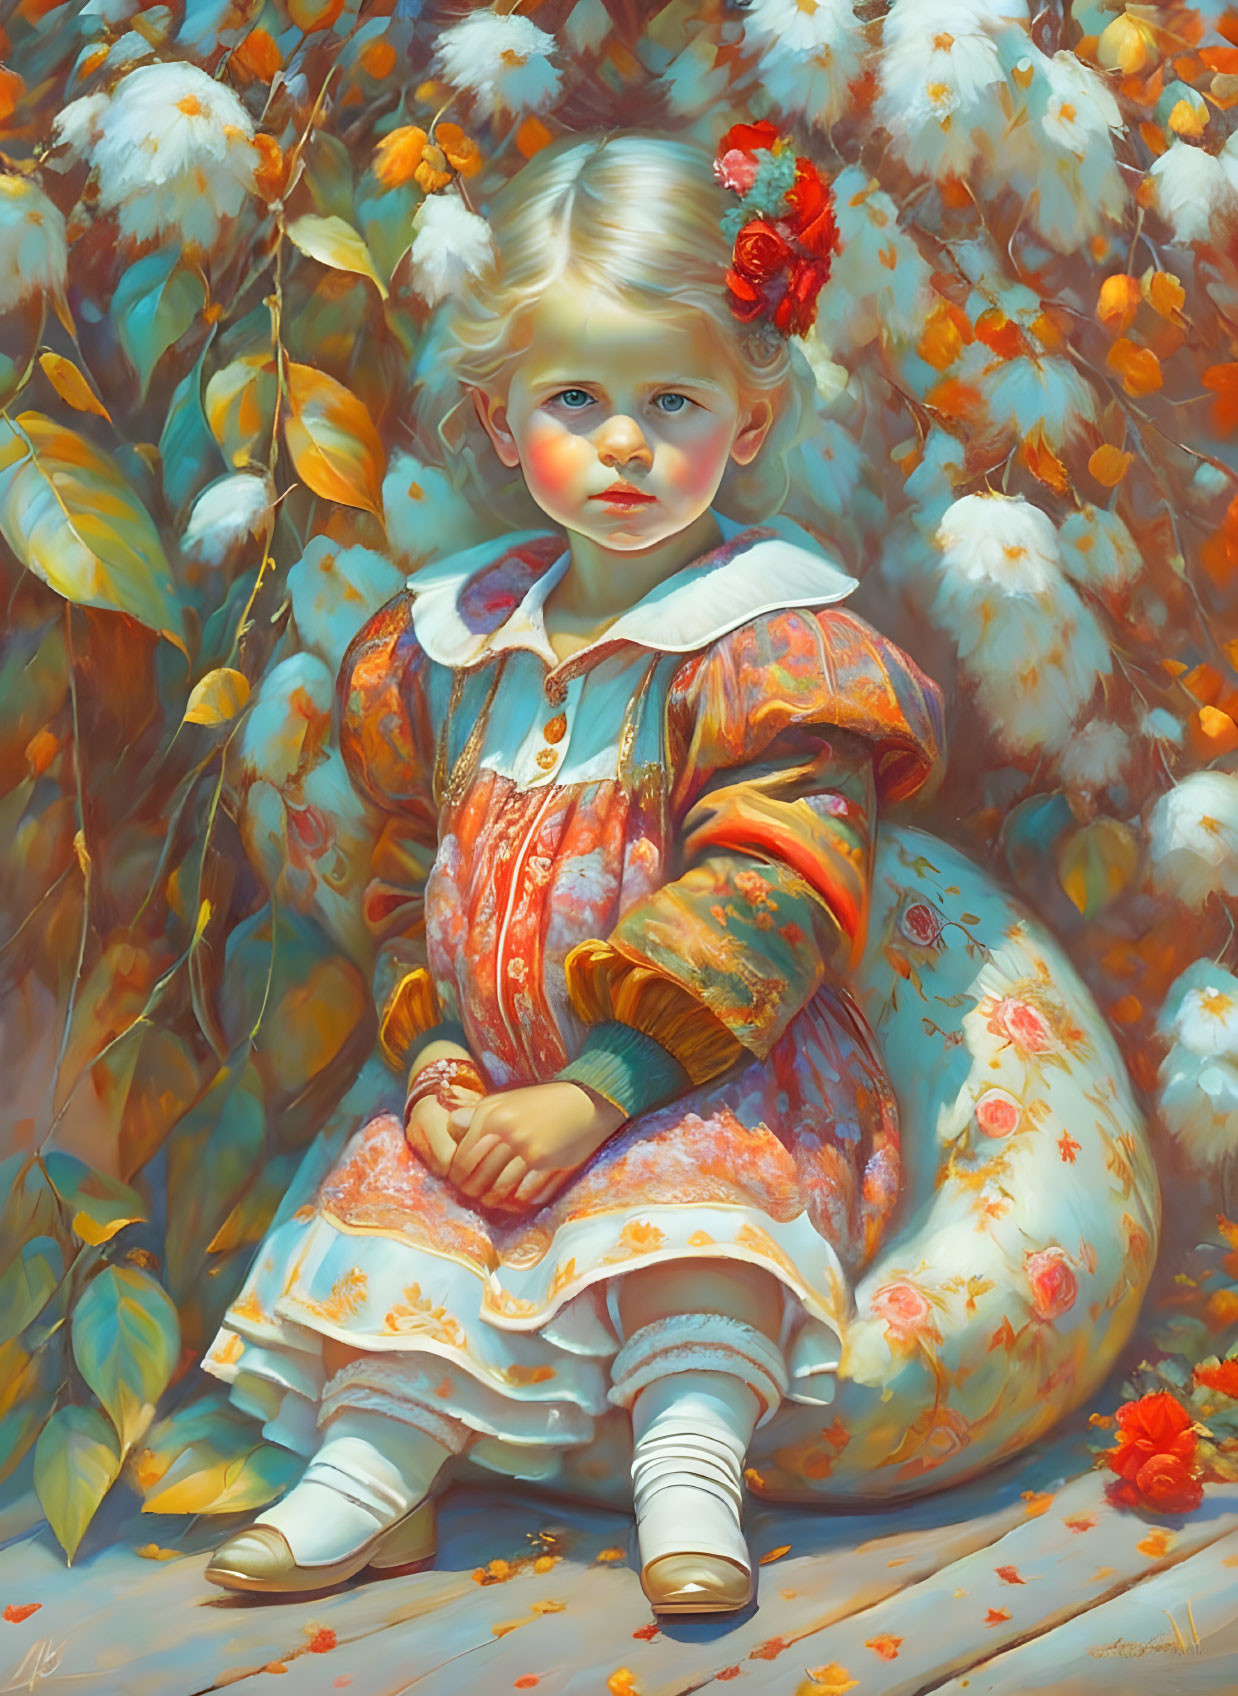 Blond child in vintage floral dress surrounded by orange flowers